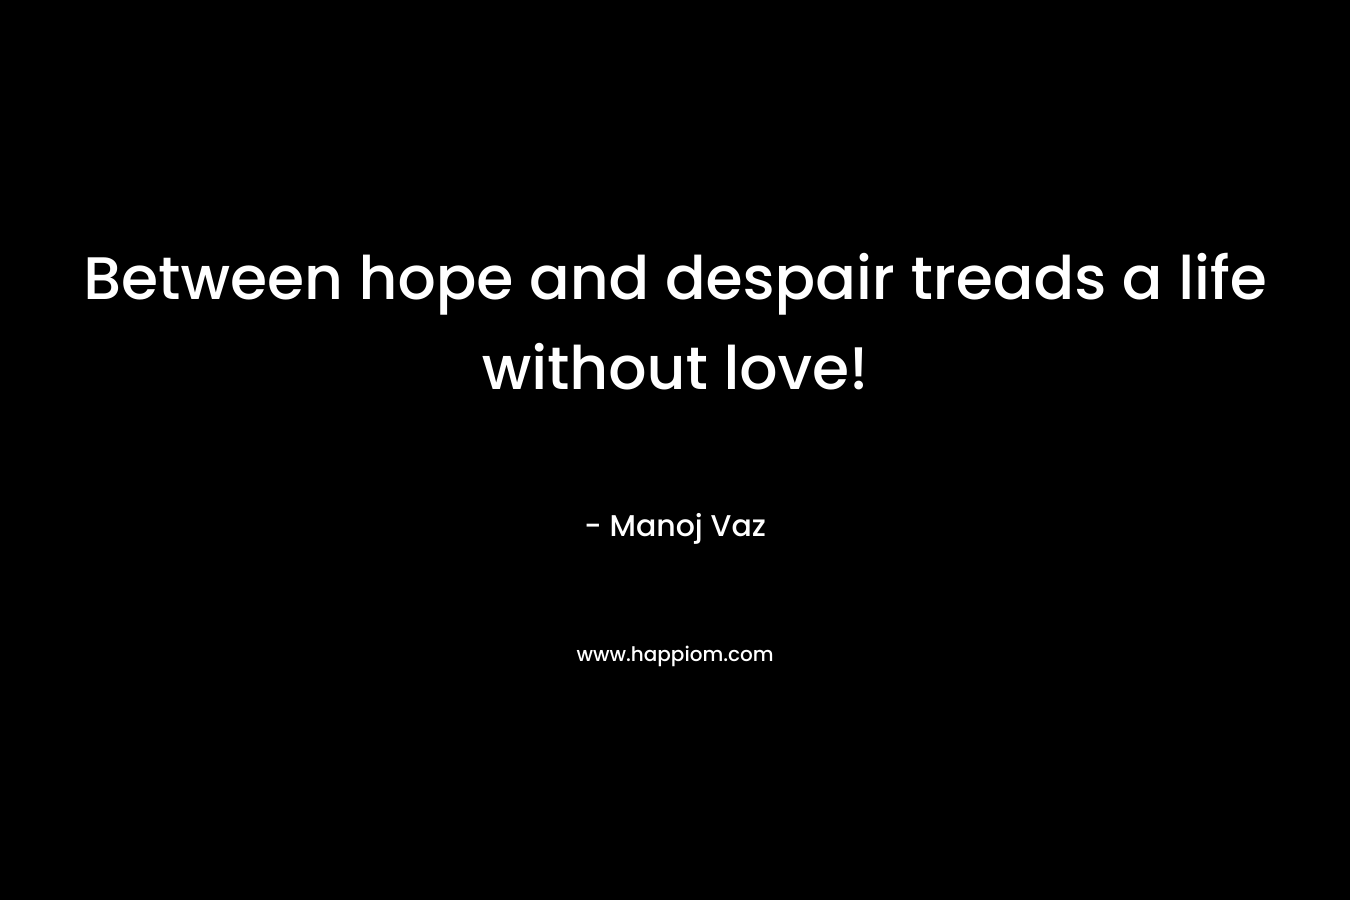 Between hope and despair treads a life without love! – Manoj Vaz